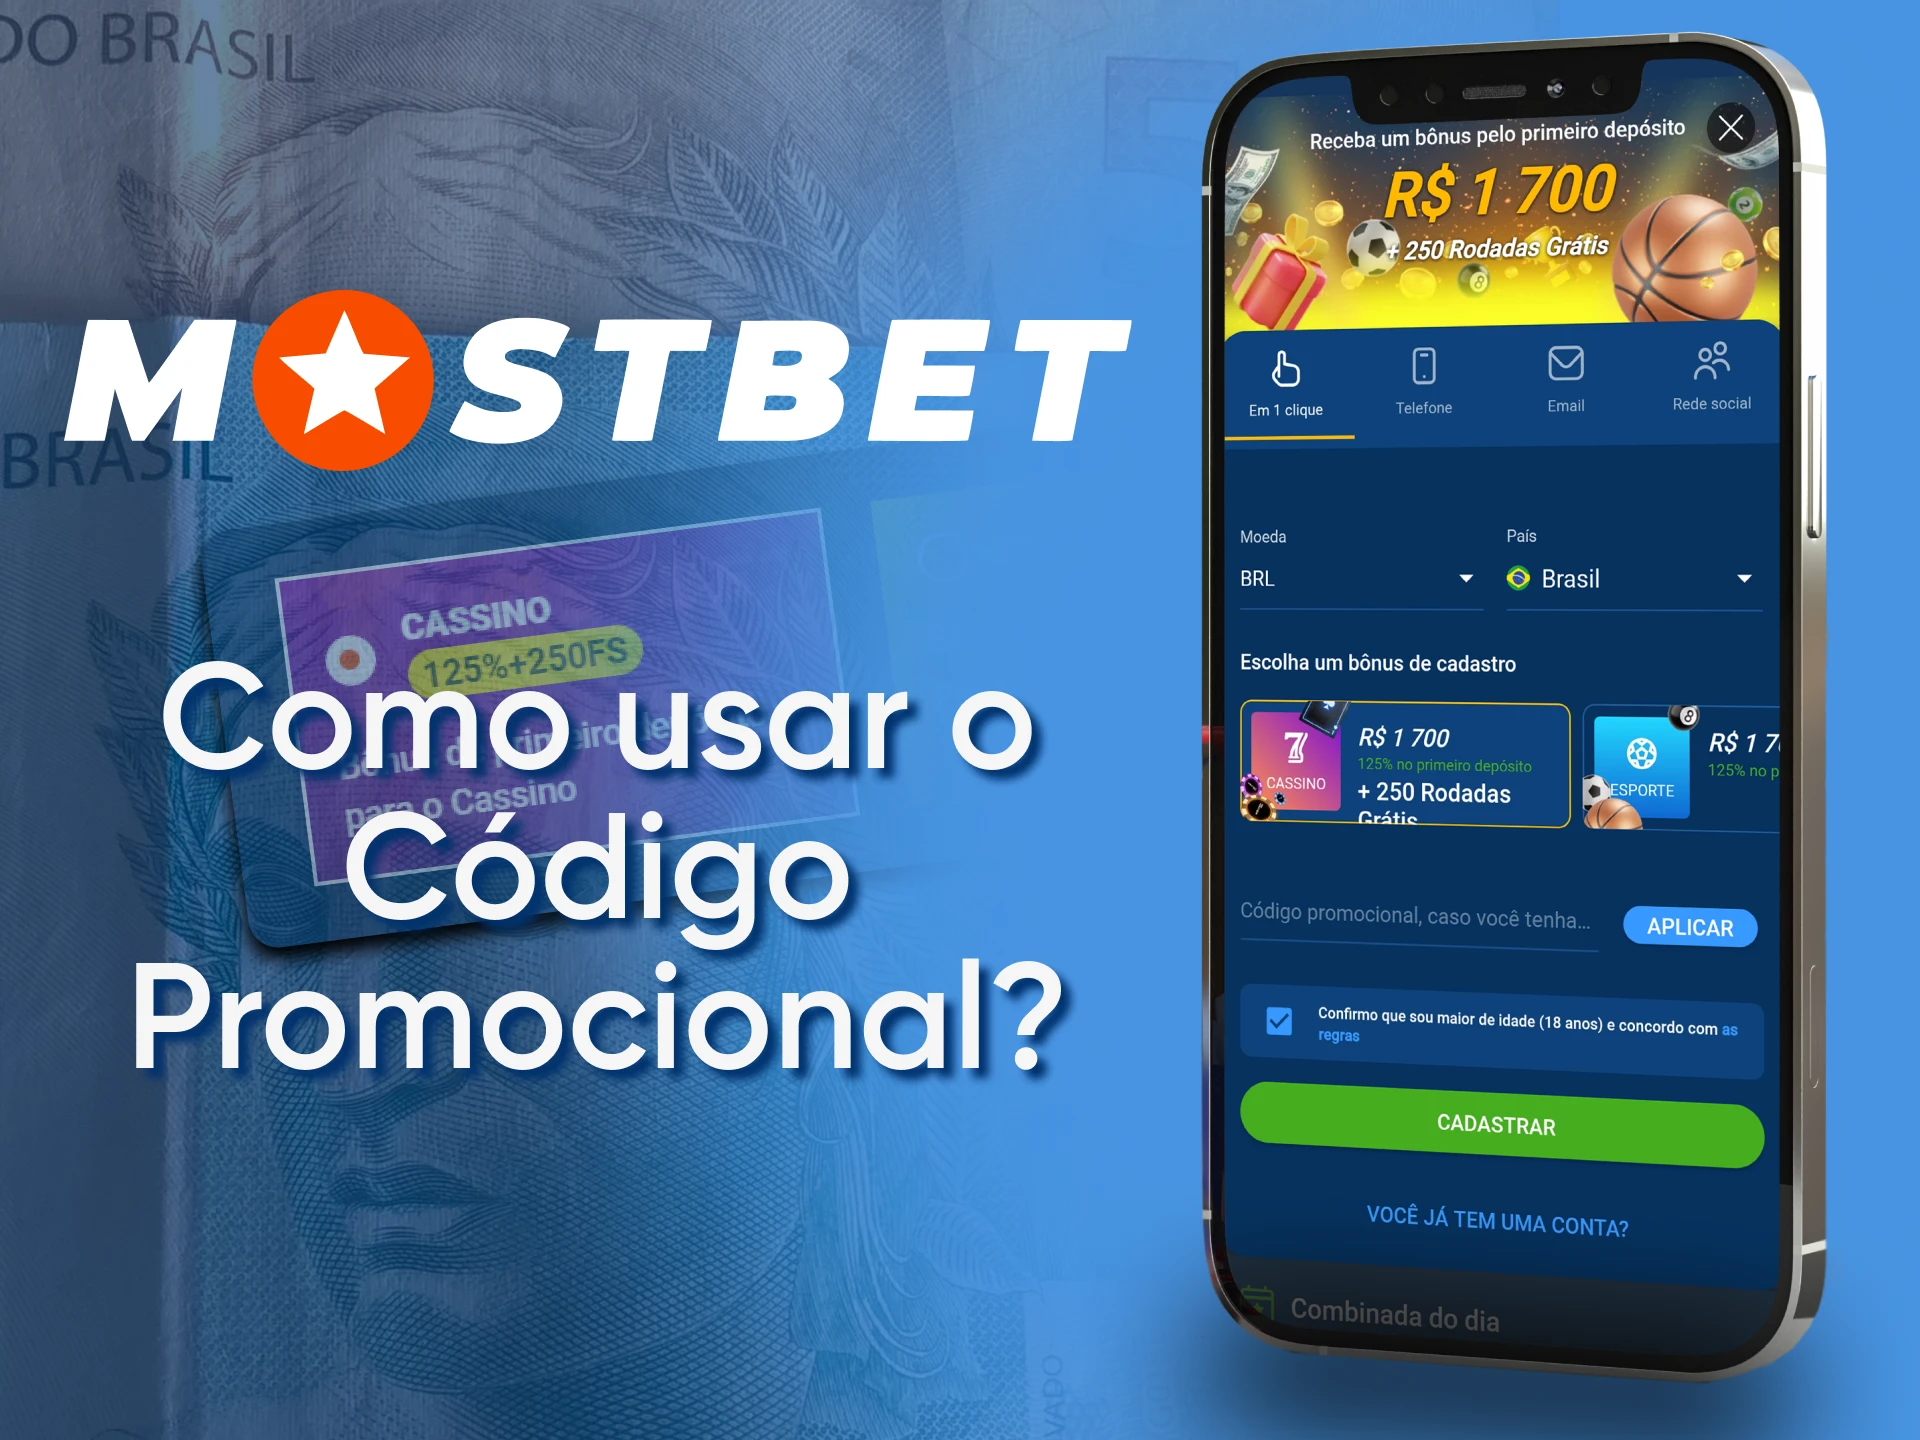 Are You Good At Mostbet app for Android and iOS in Qatar? Here's A Quick Quiz To Find Out